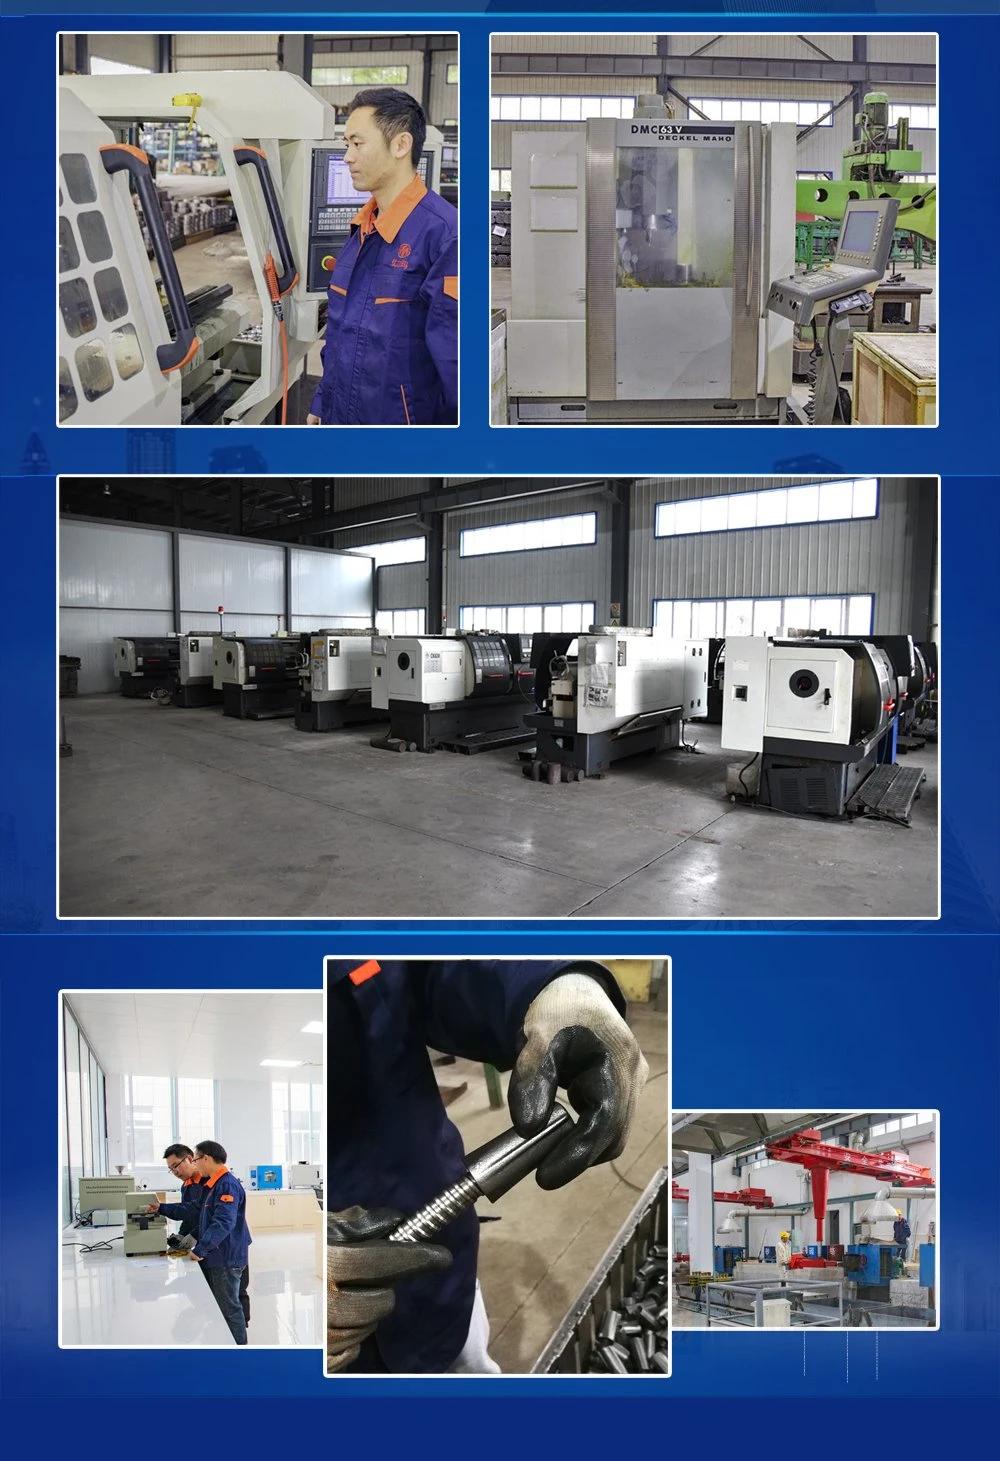 Machining,Accessories,Decoration,Company,Forging,Pressing,Mating Facility,Hydraulic,Pressure,Pumping,Decoration,Lighting,Warehouse,Basement,Power Fitting,Bus